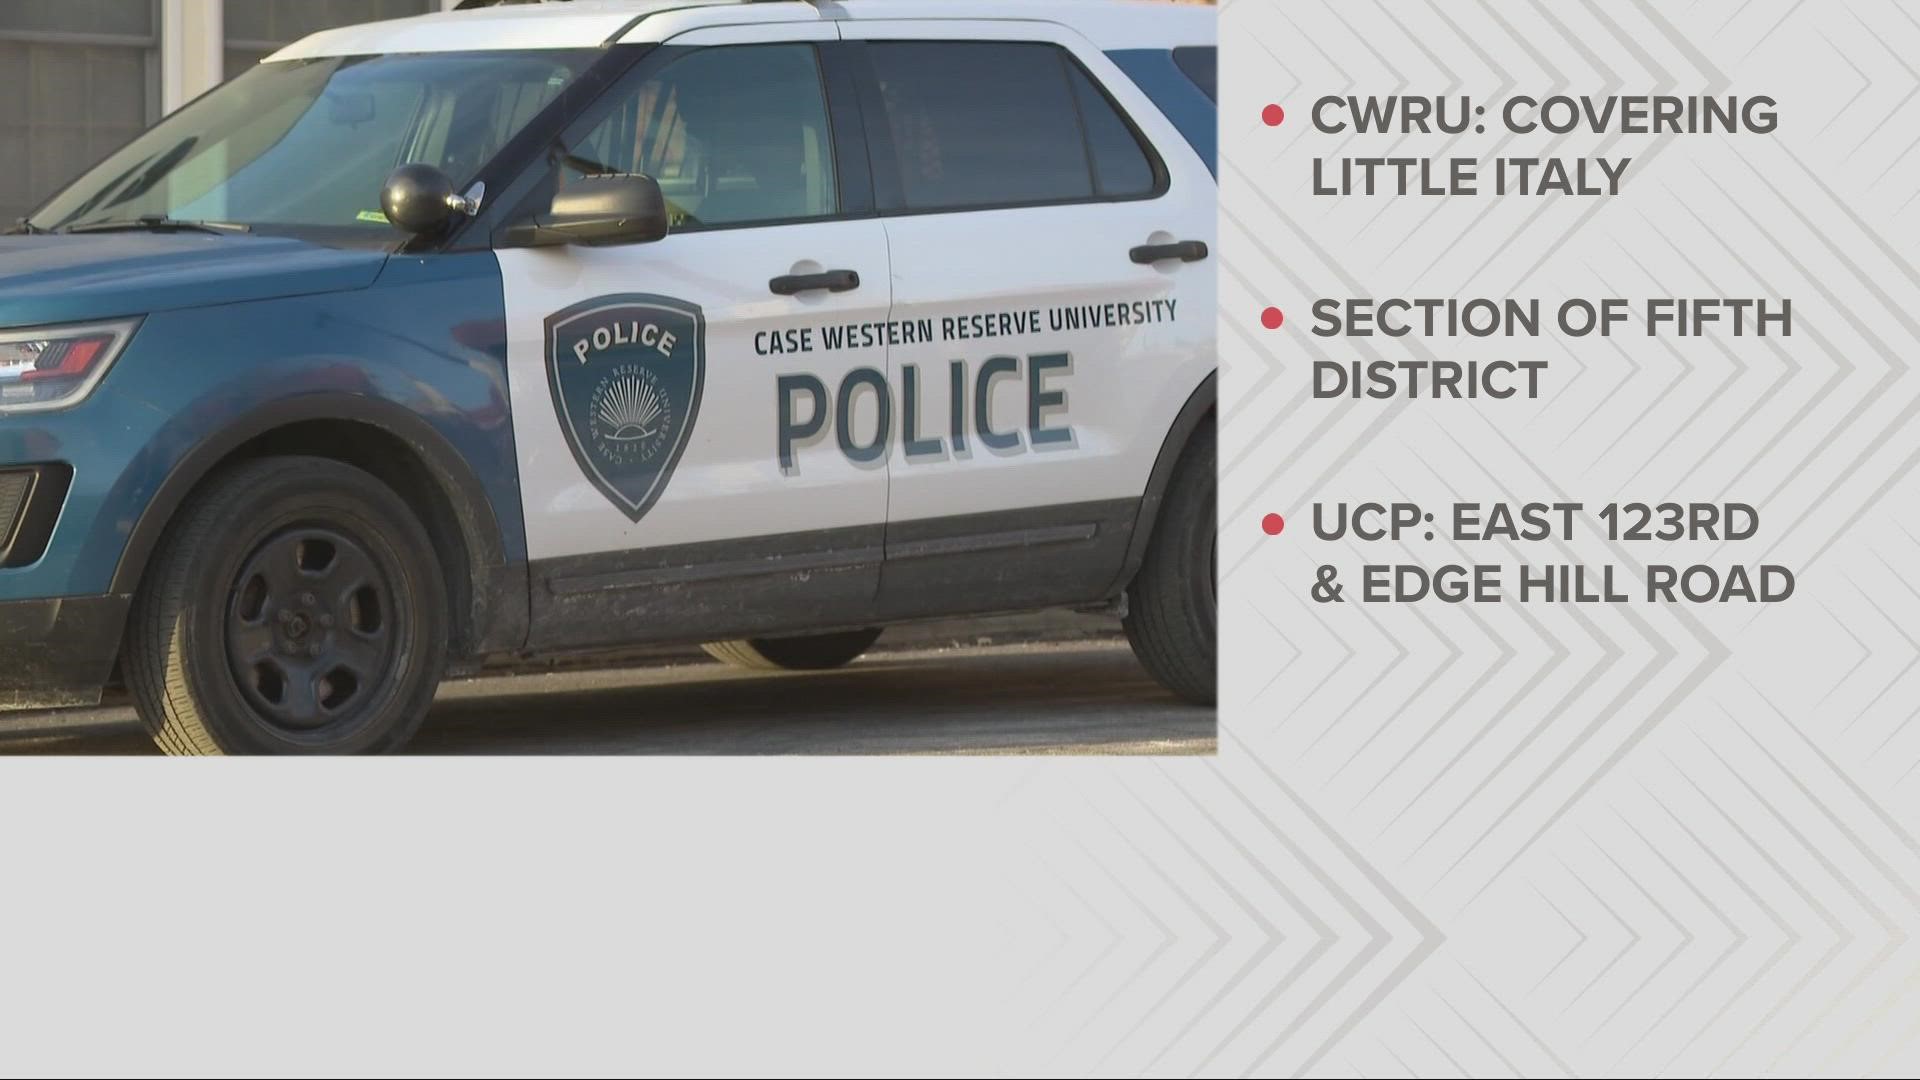 The Cleveland Division of Police will soon be receiving assistance in patrolling several areas of the city. Council passed the measure on Monday evening.